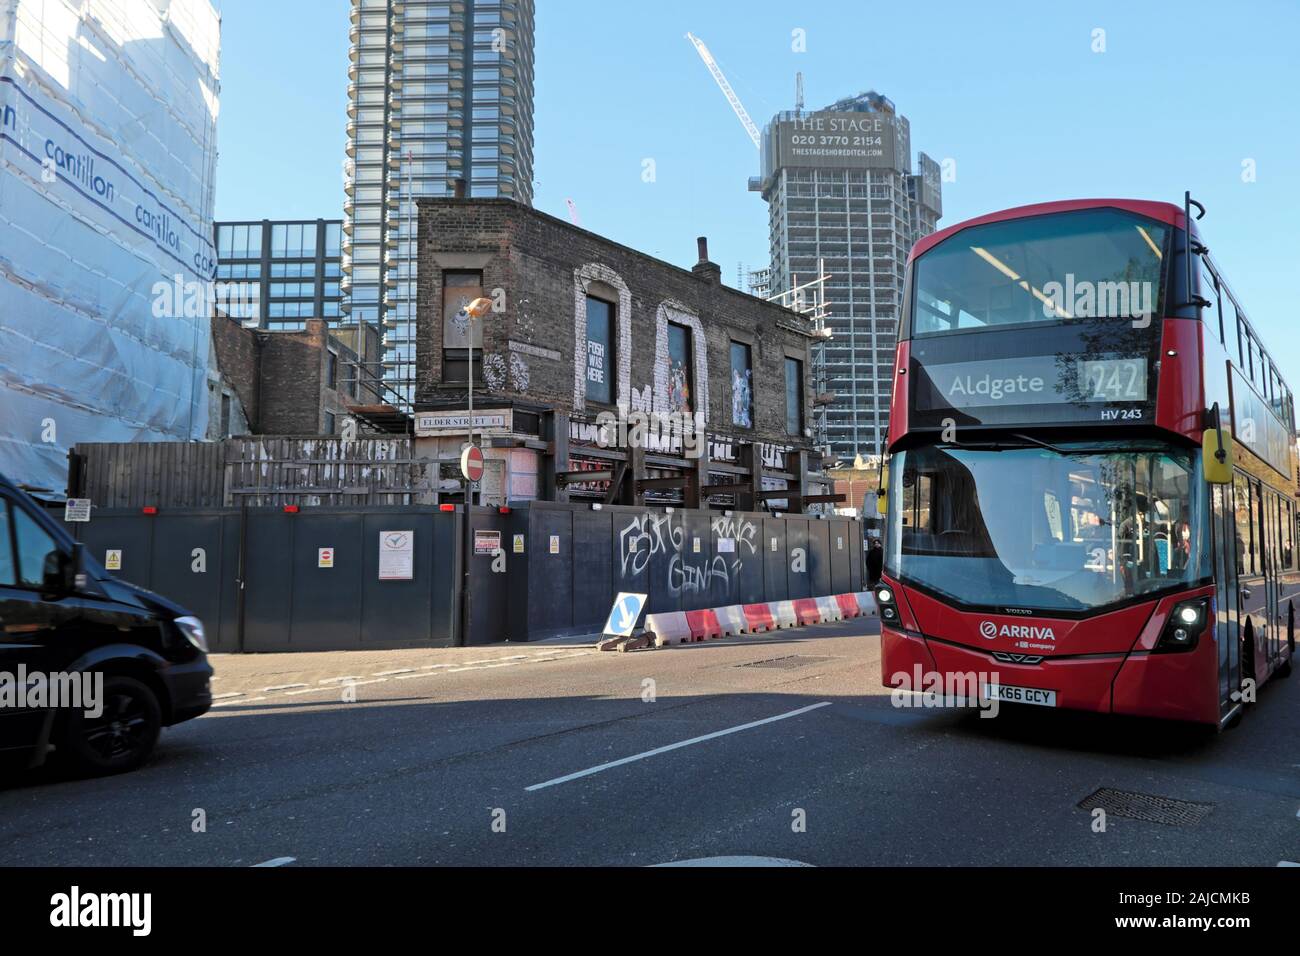 View of derelict building, Principal Place & The Stage residential tower under construction & red bus from Commercial Street London E1  KATHY DEWITT Stock Photo